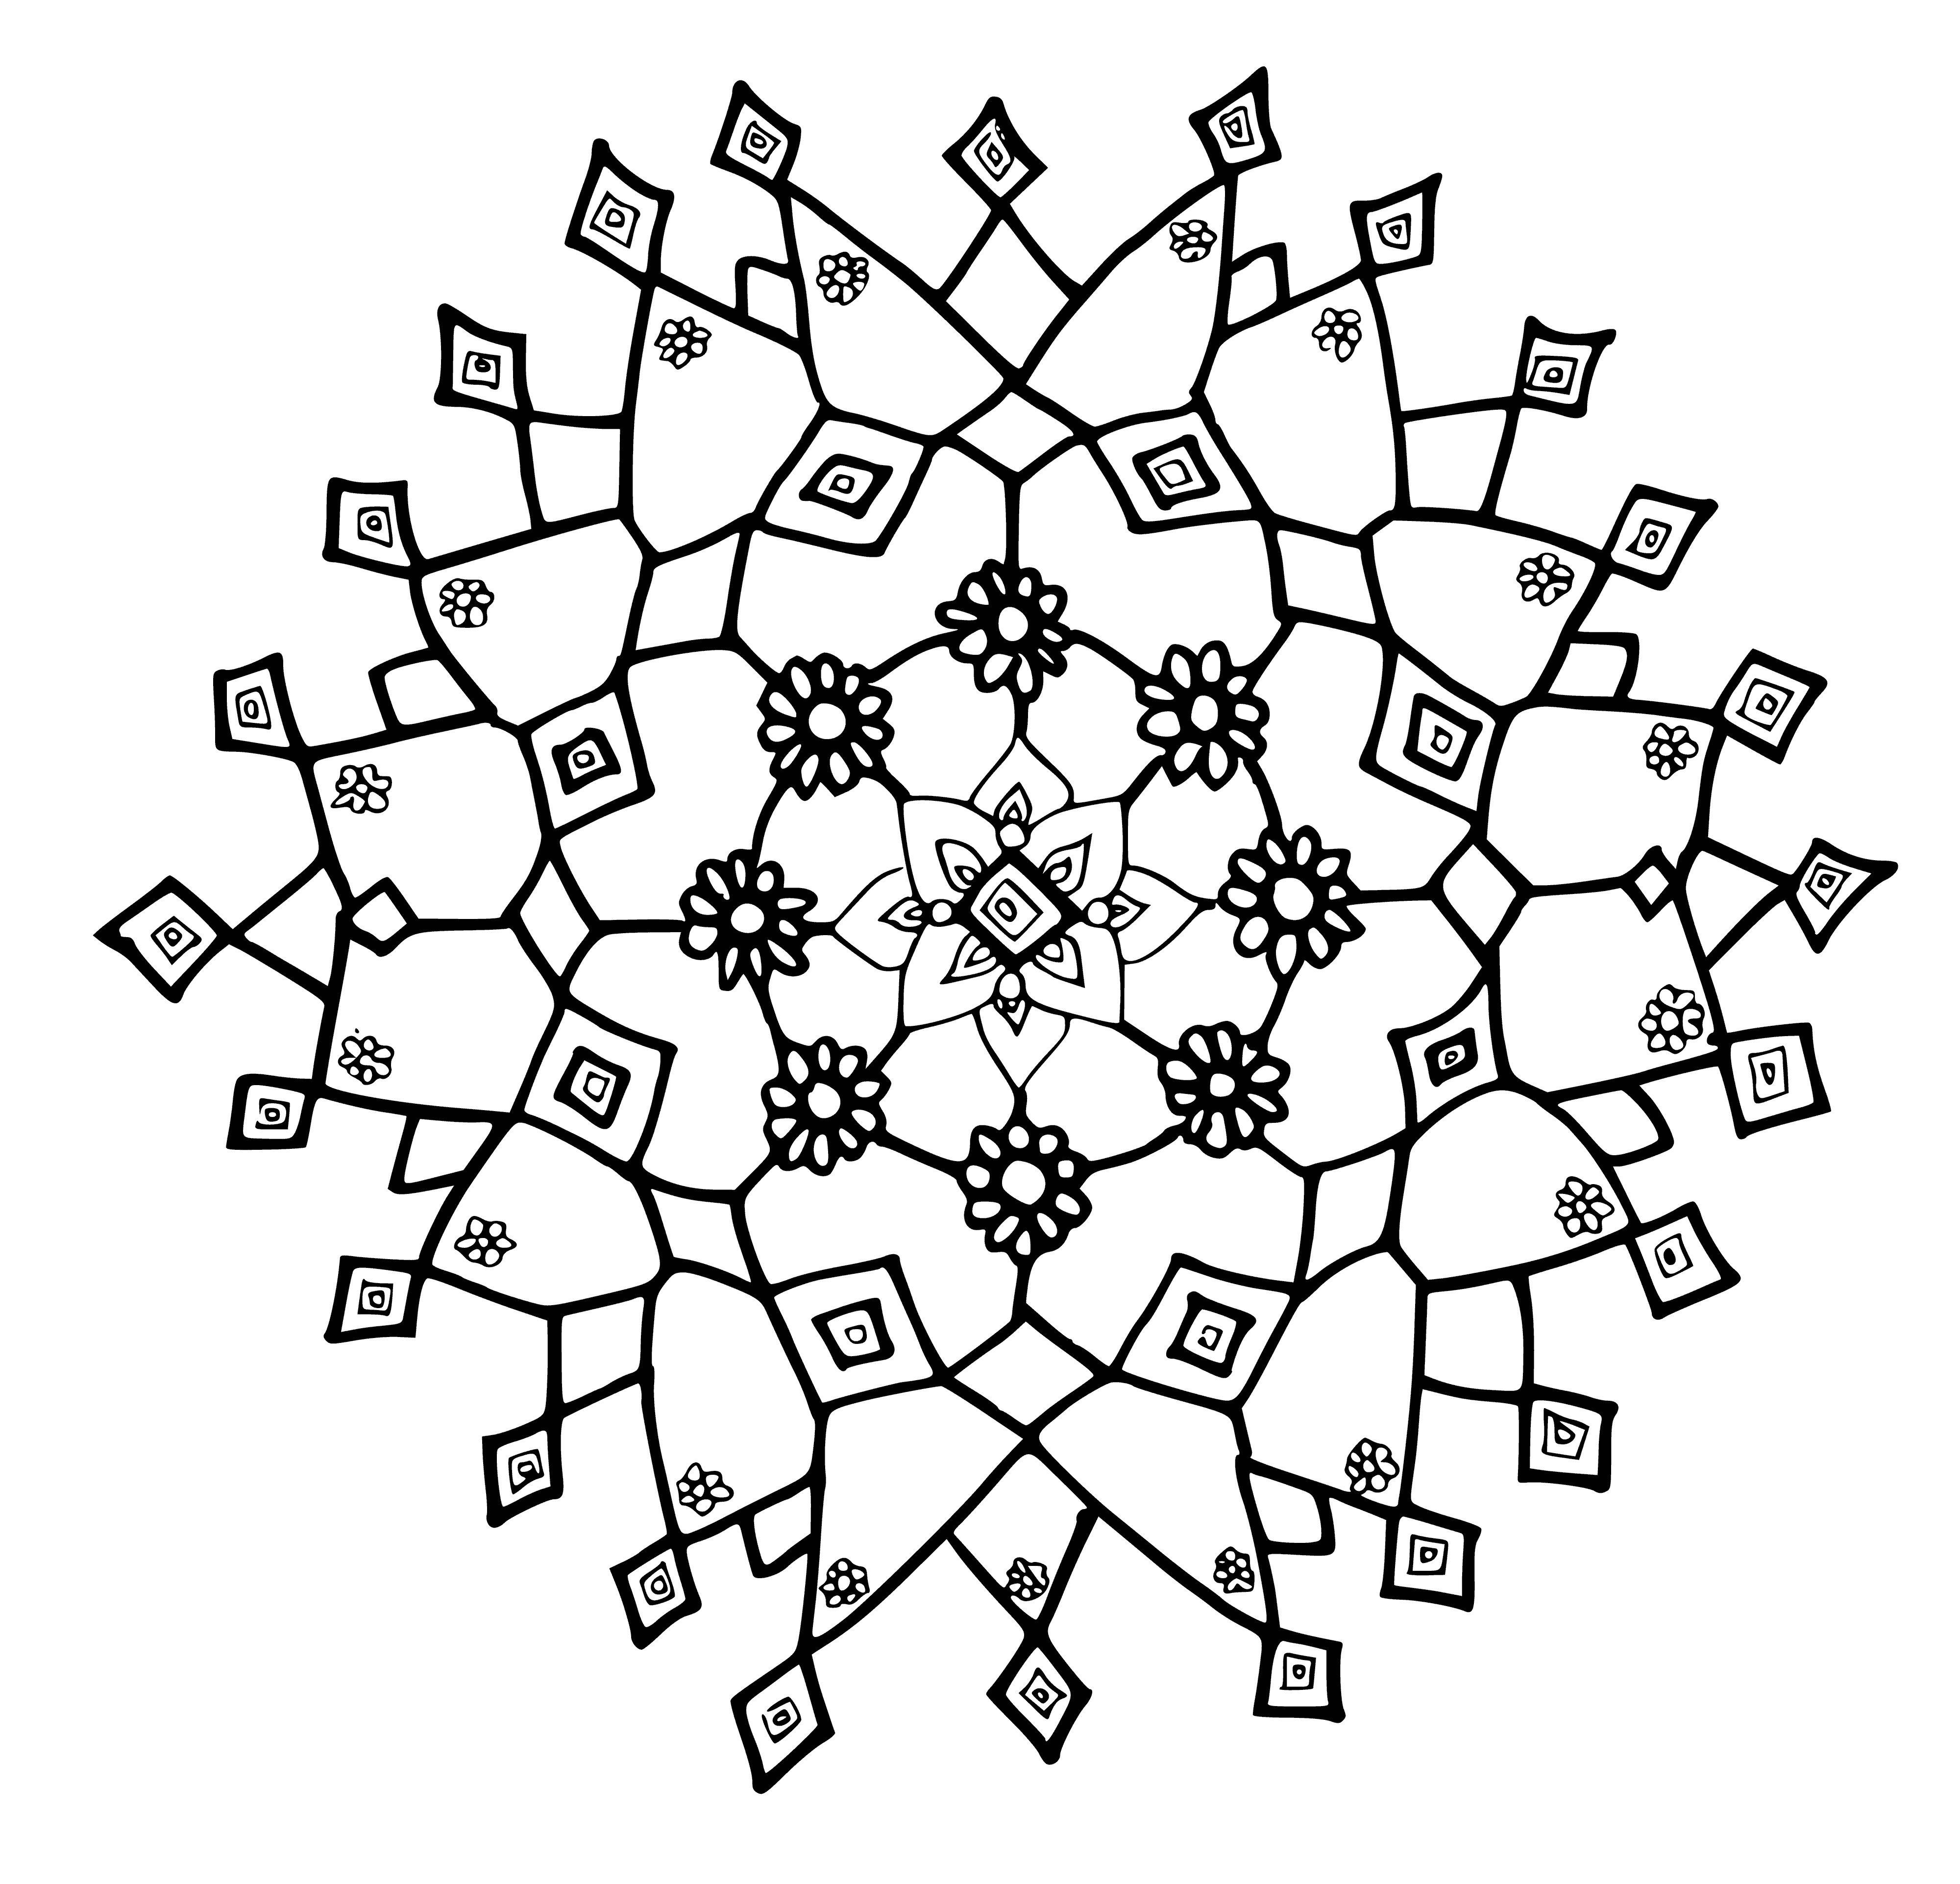 coloring page: Gorgeous large snowflake on light blue background with snowflakes falling around it.